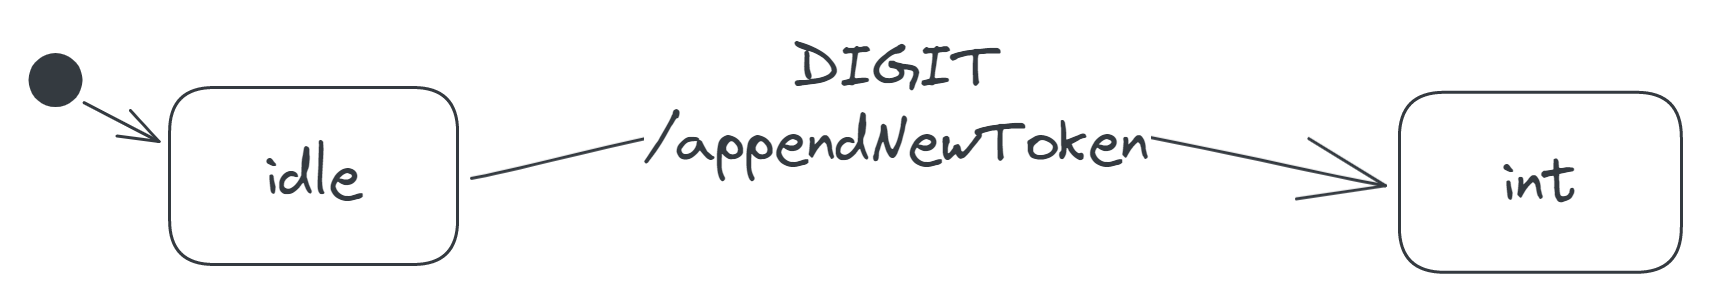 A transition labelled 'DIGIT/appendNewToken', from the idle to the int state.